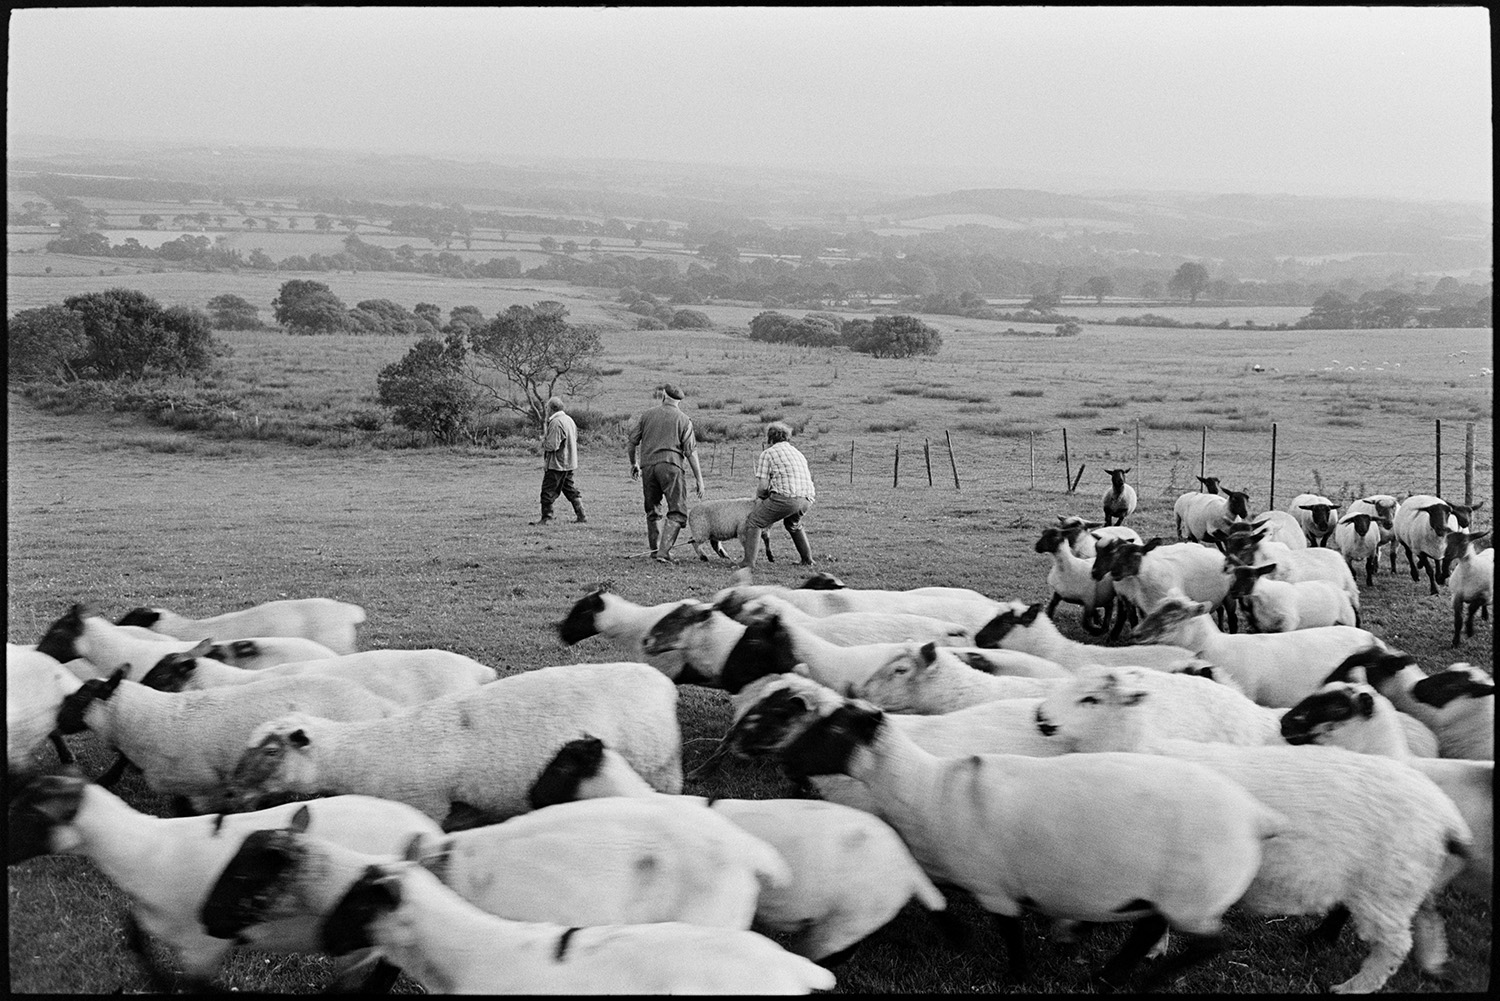 Farmers checking sheep on moor, opening gate to go home, dog. 
[Three men checking sheep in a field on Hatherleigh Moor. One of the men is holding a sheep. The rest of the flock can be seen in the foreground and a landscape of trees and fields is visible in the background.]